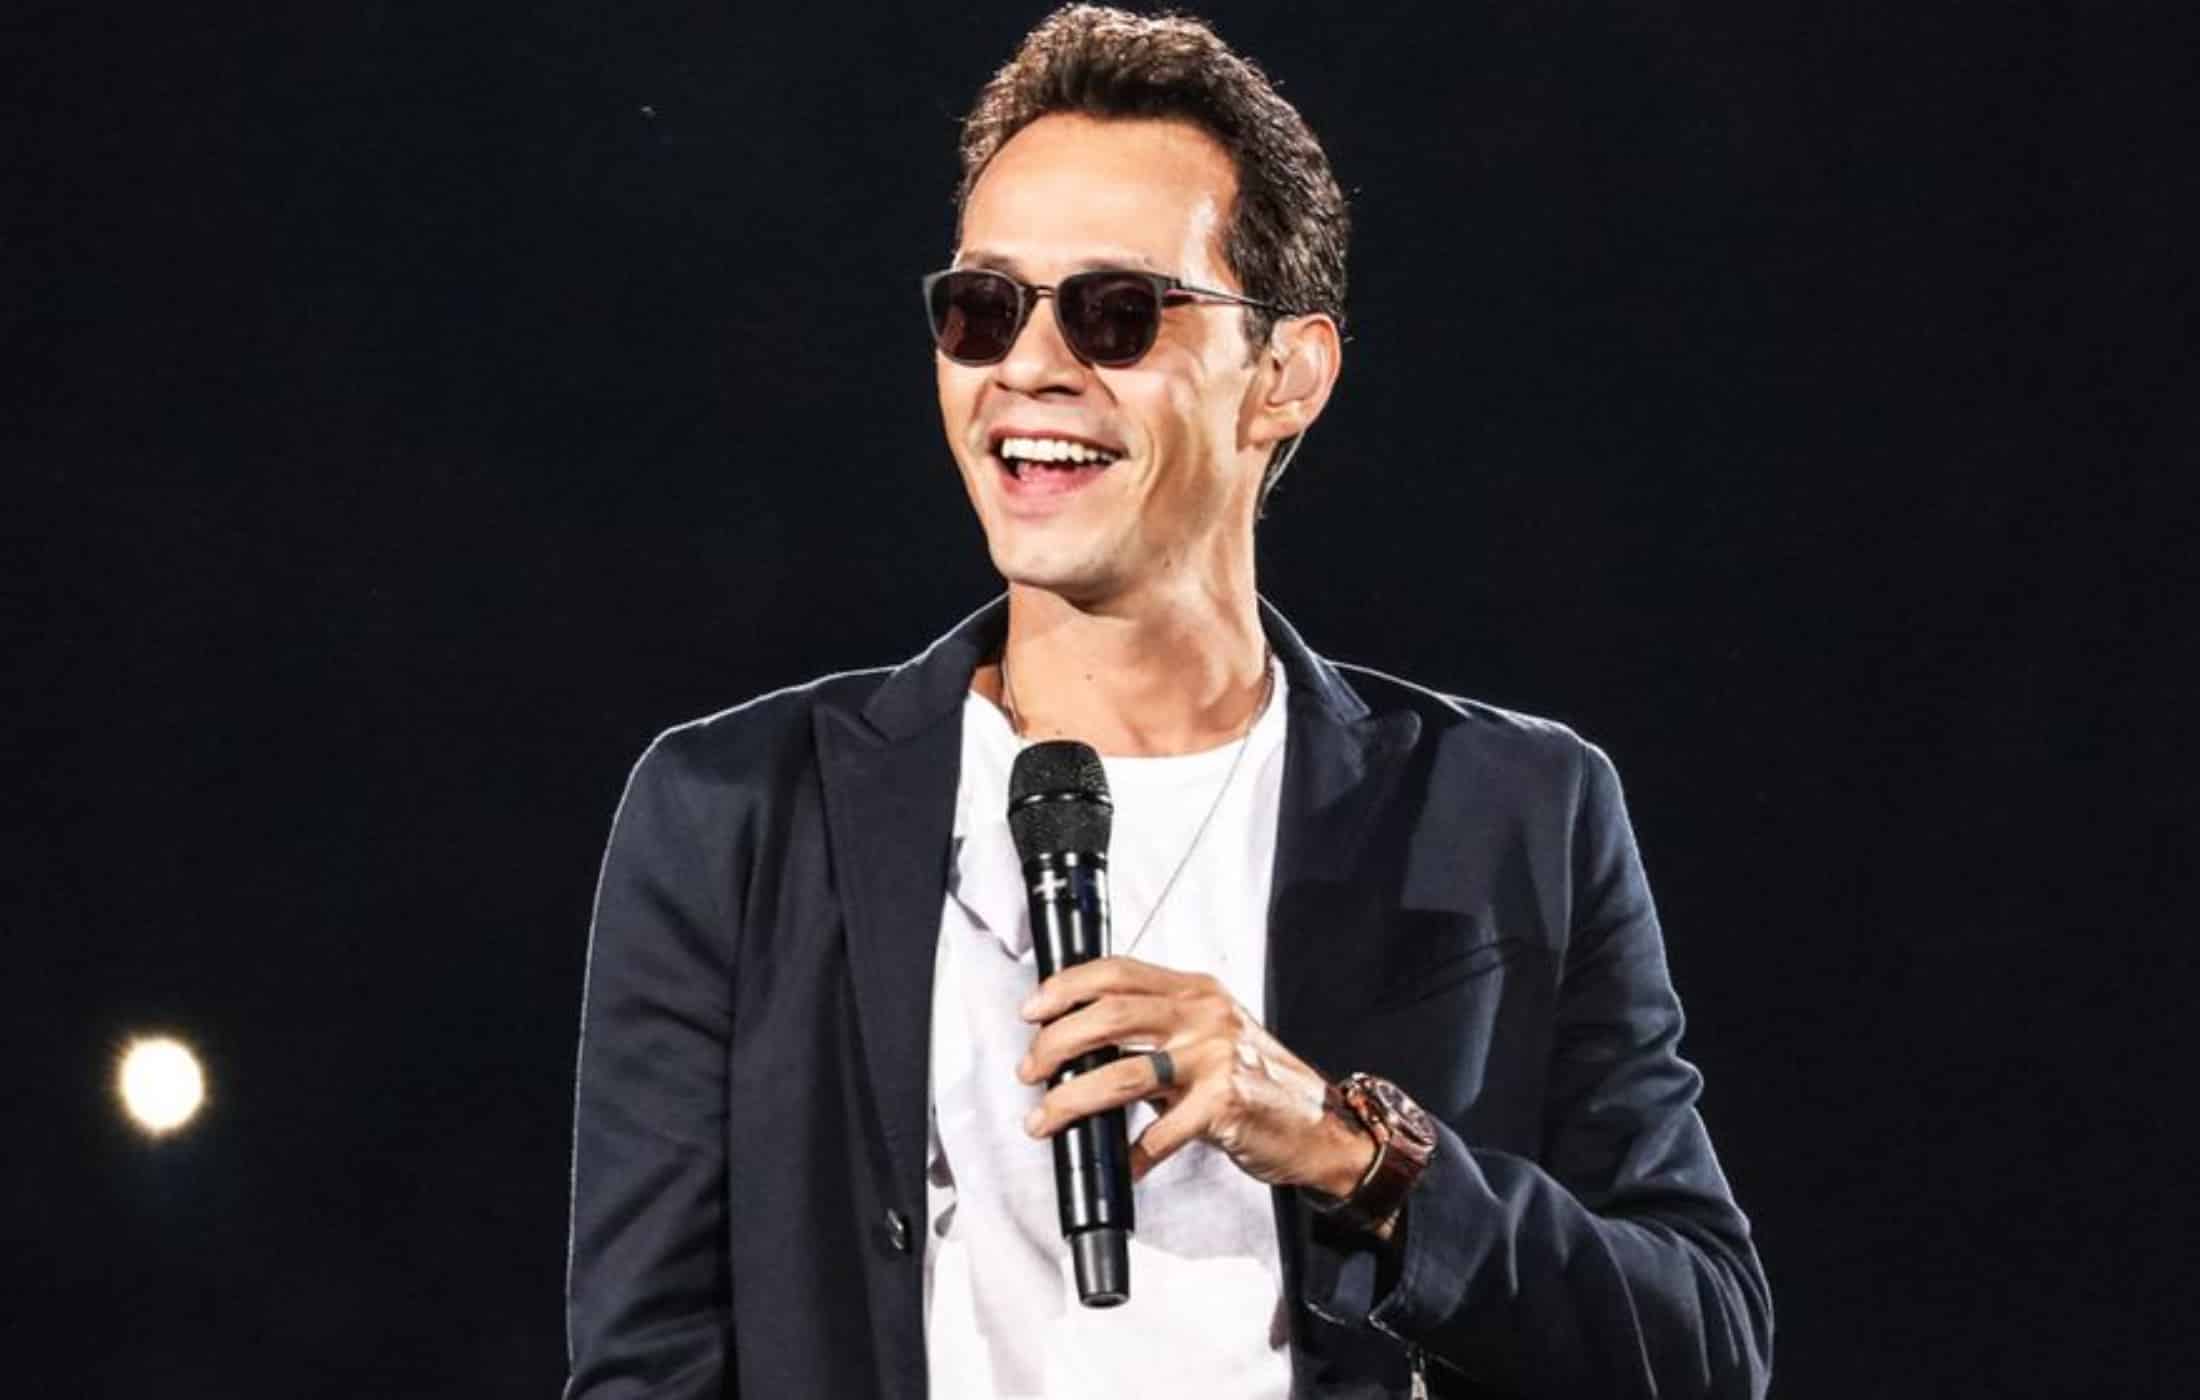 Marc Anthony net worth, age, height, wiki, biography, and latest